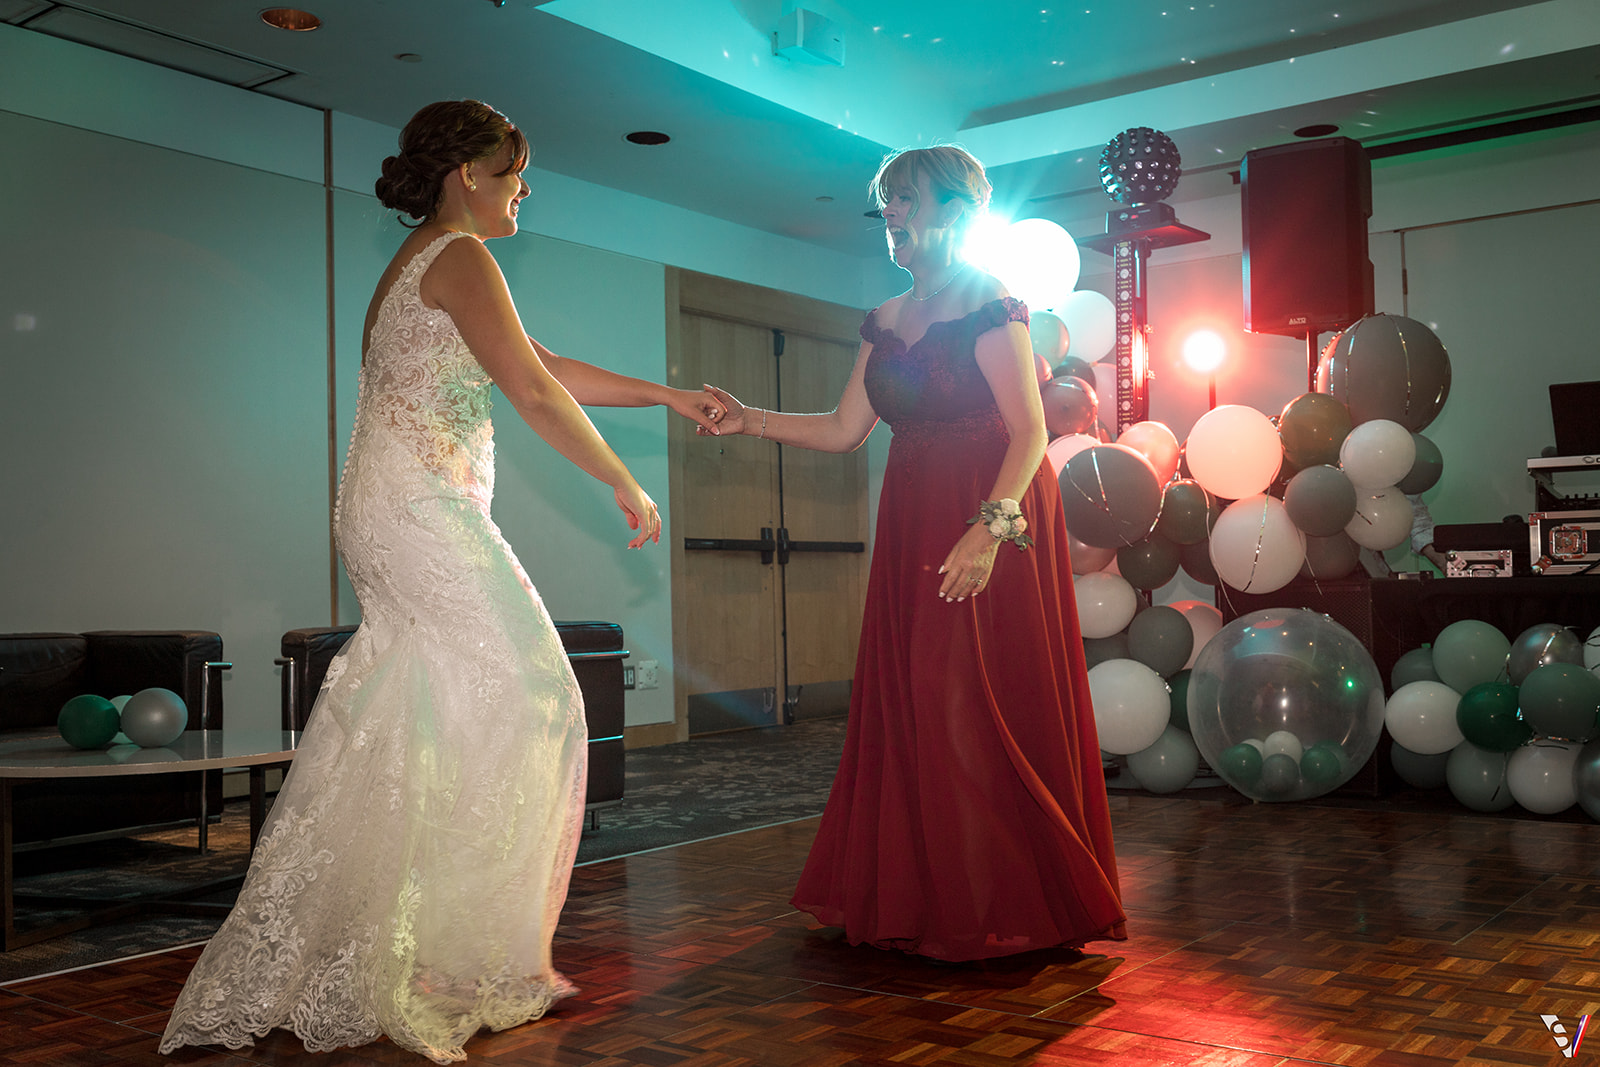 How your first dance sets the tone for your marriage.